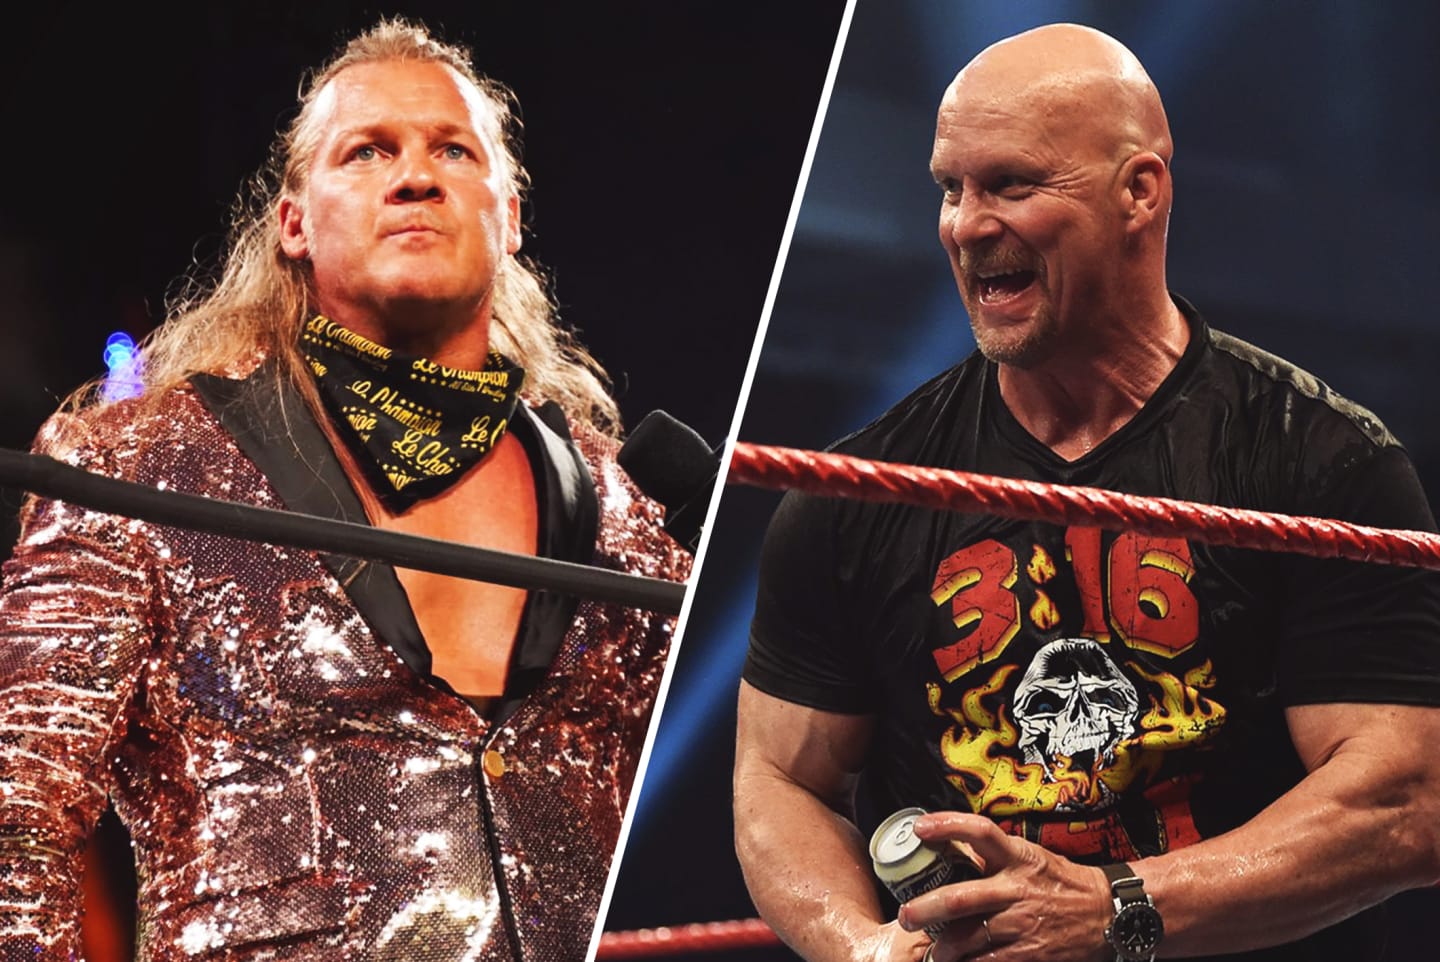 Stone Cold” Steve Austin talks about the “Smoking Skull” WWE Title